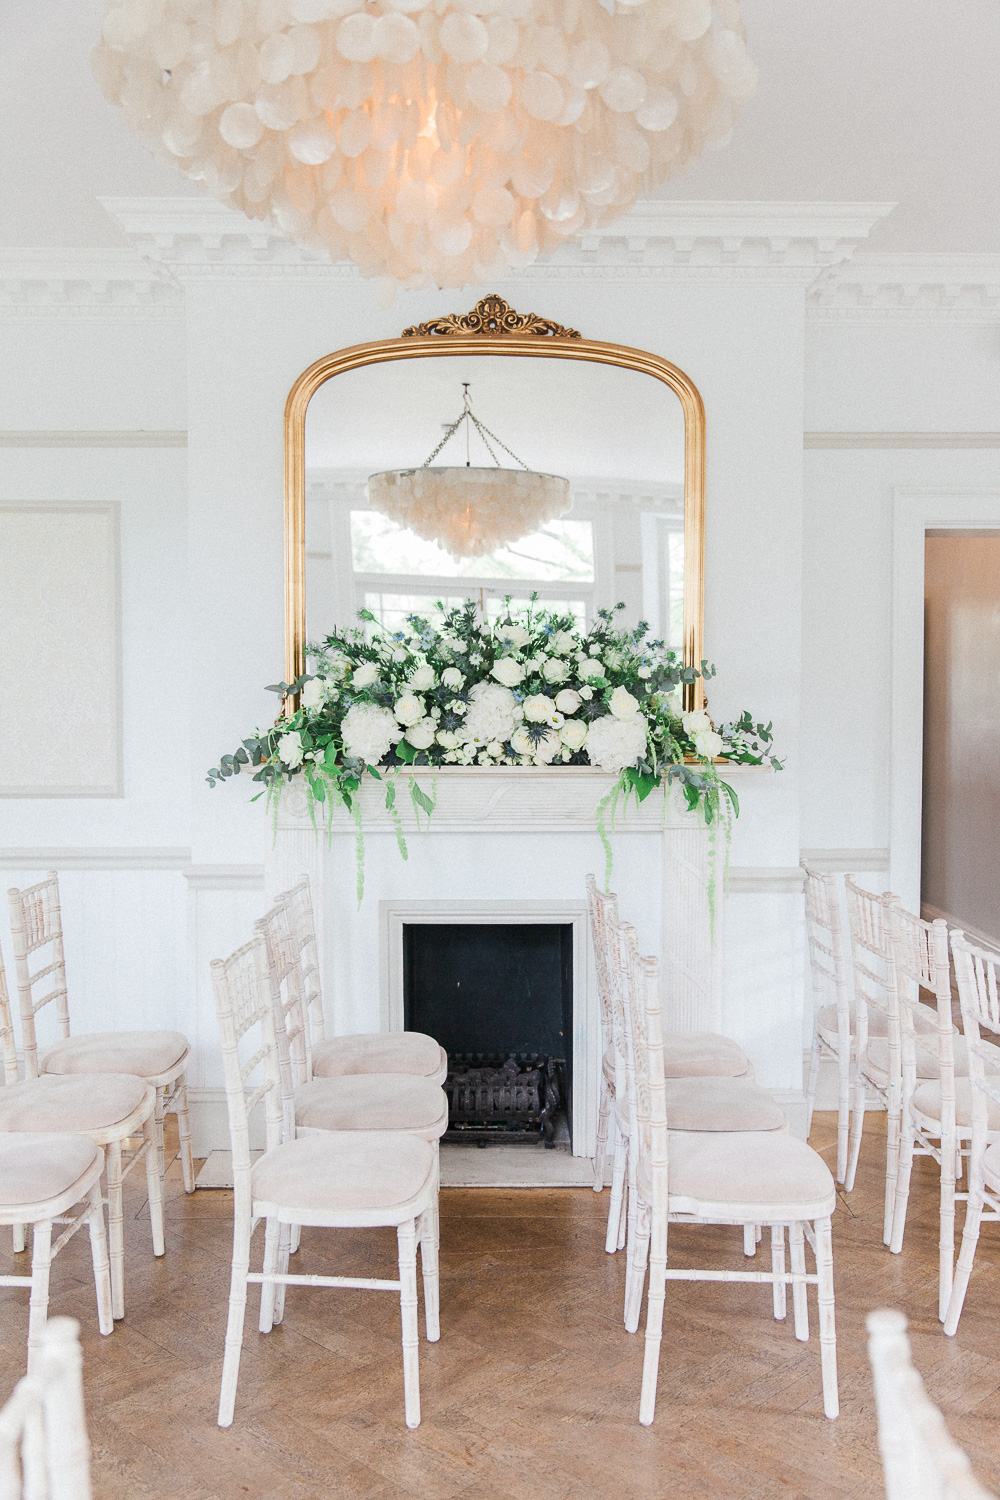 Decorated fireplace in the indoor ceremony room of Belair House wedding venue in London